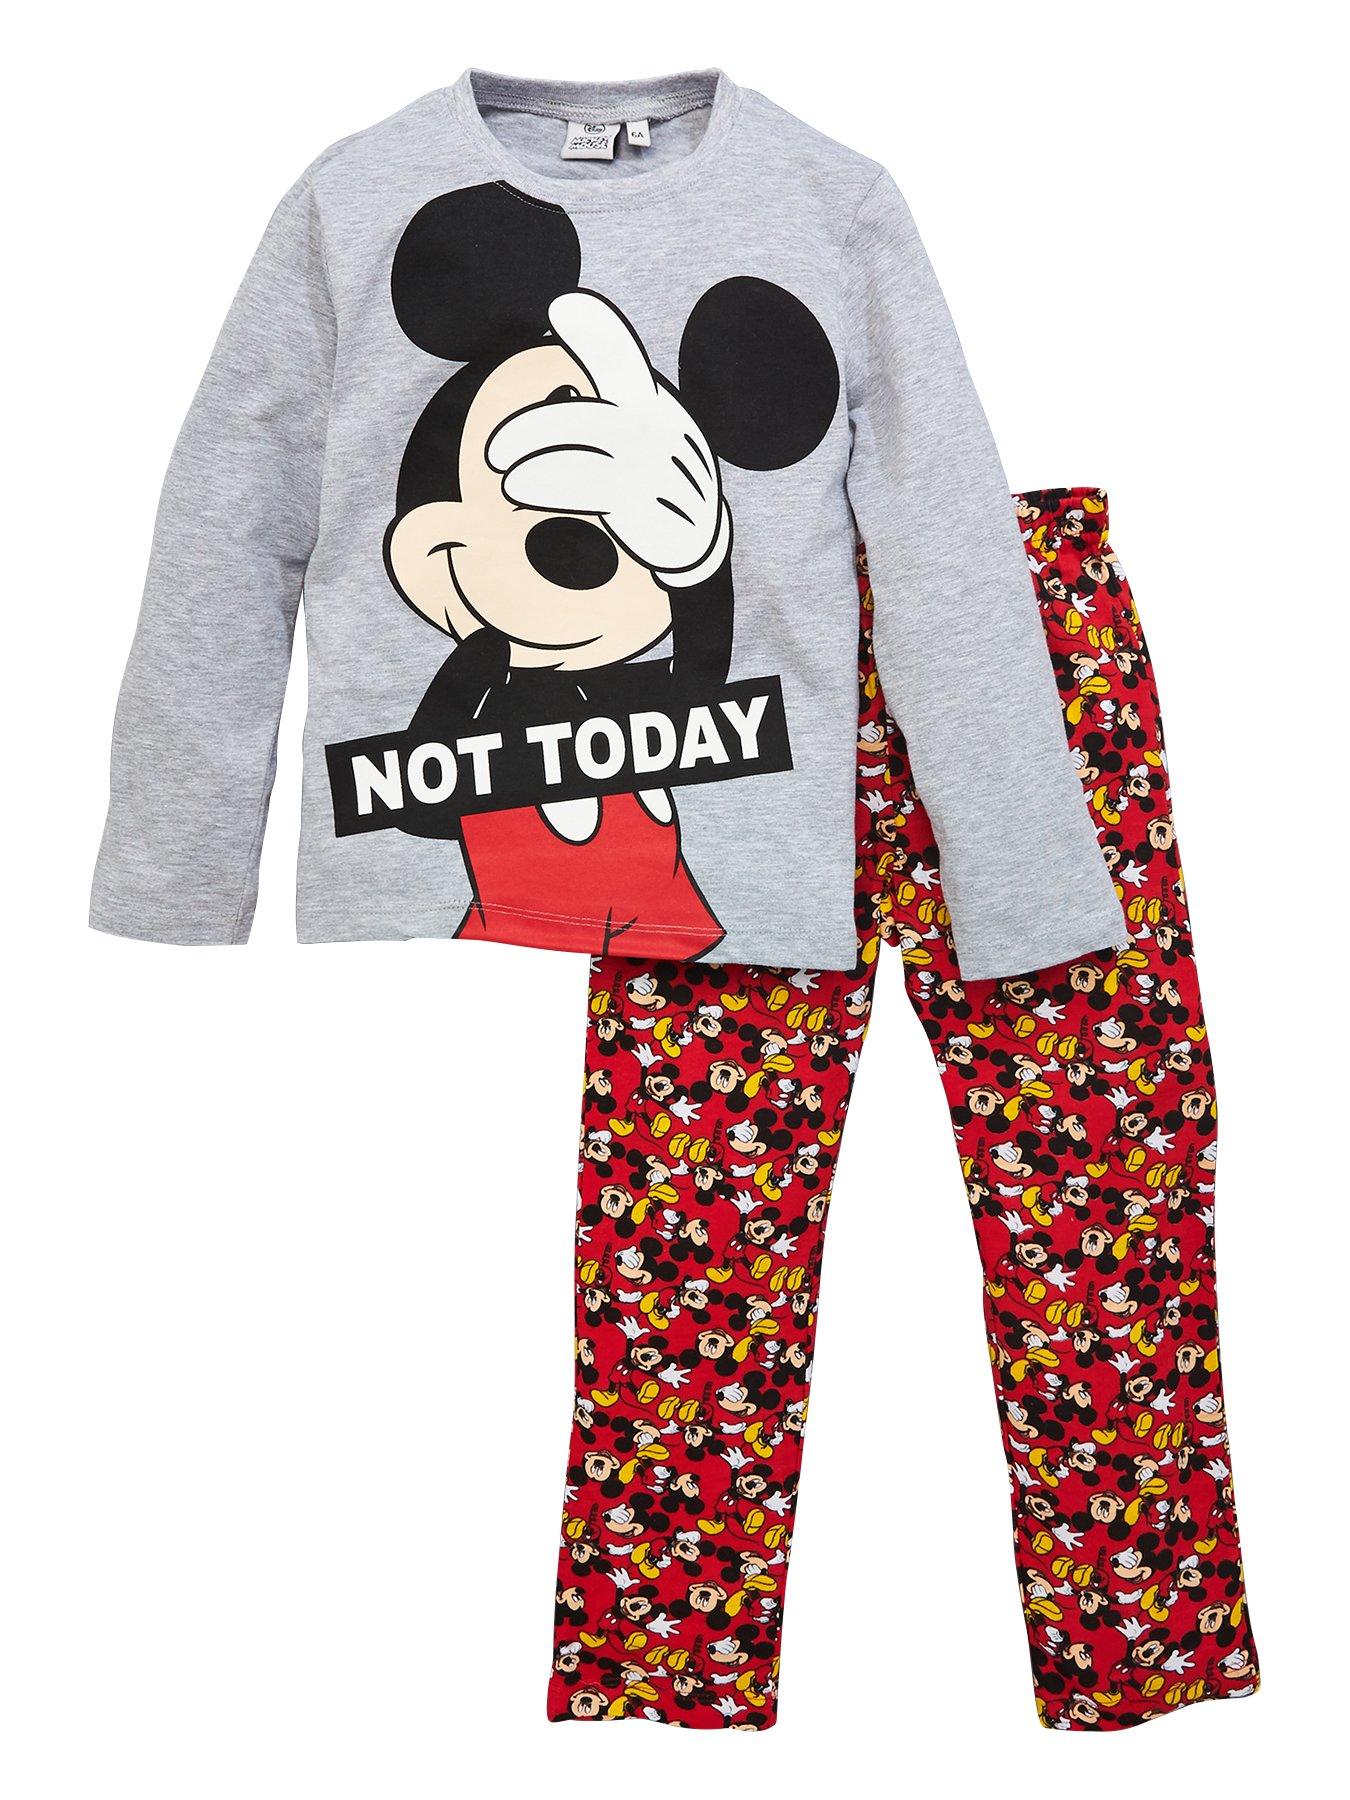 Details about   Boys Pajamas Kids Clothing Toddler Outfit Mickey Mouse 